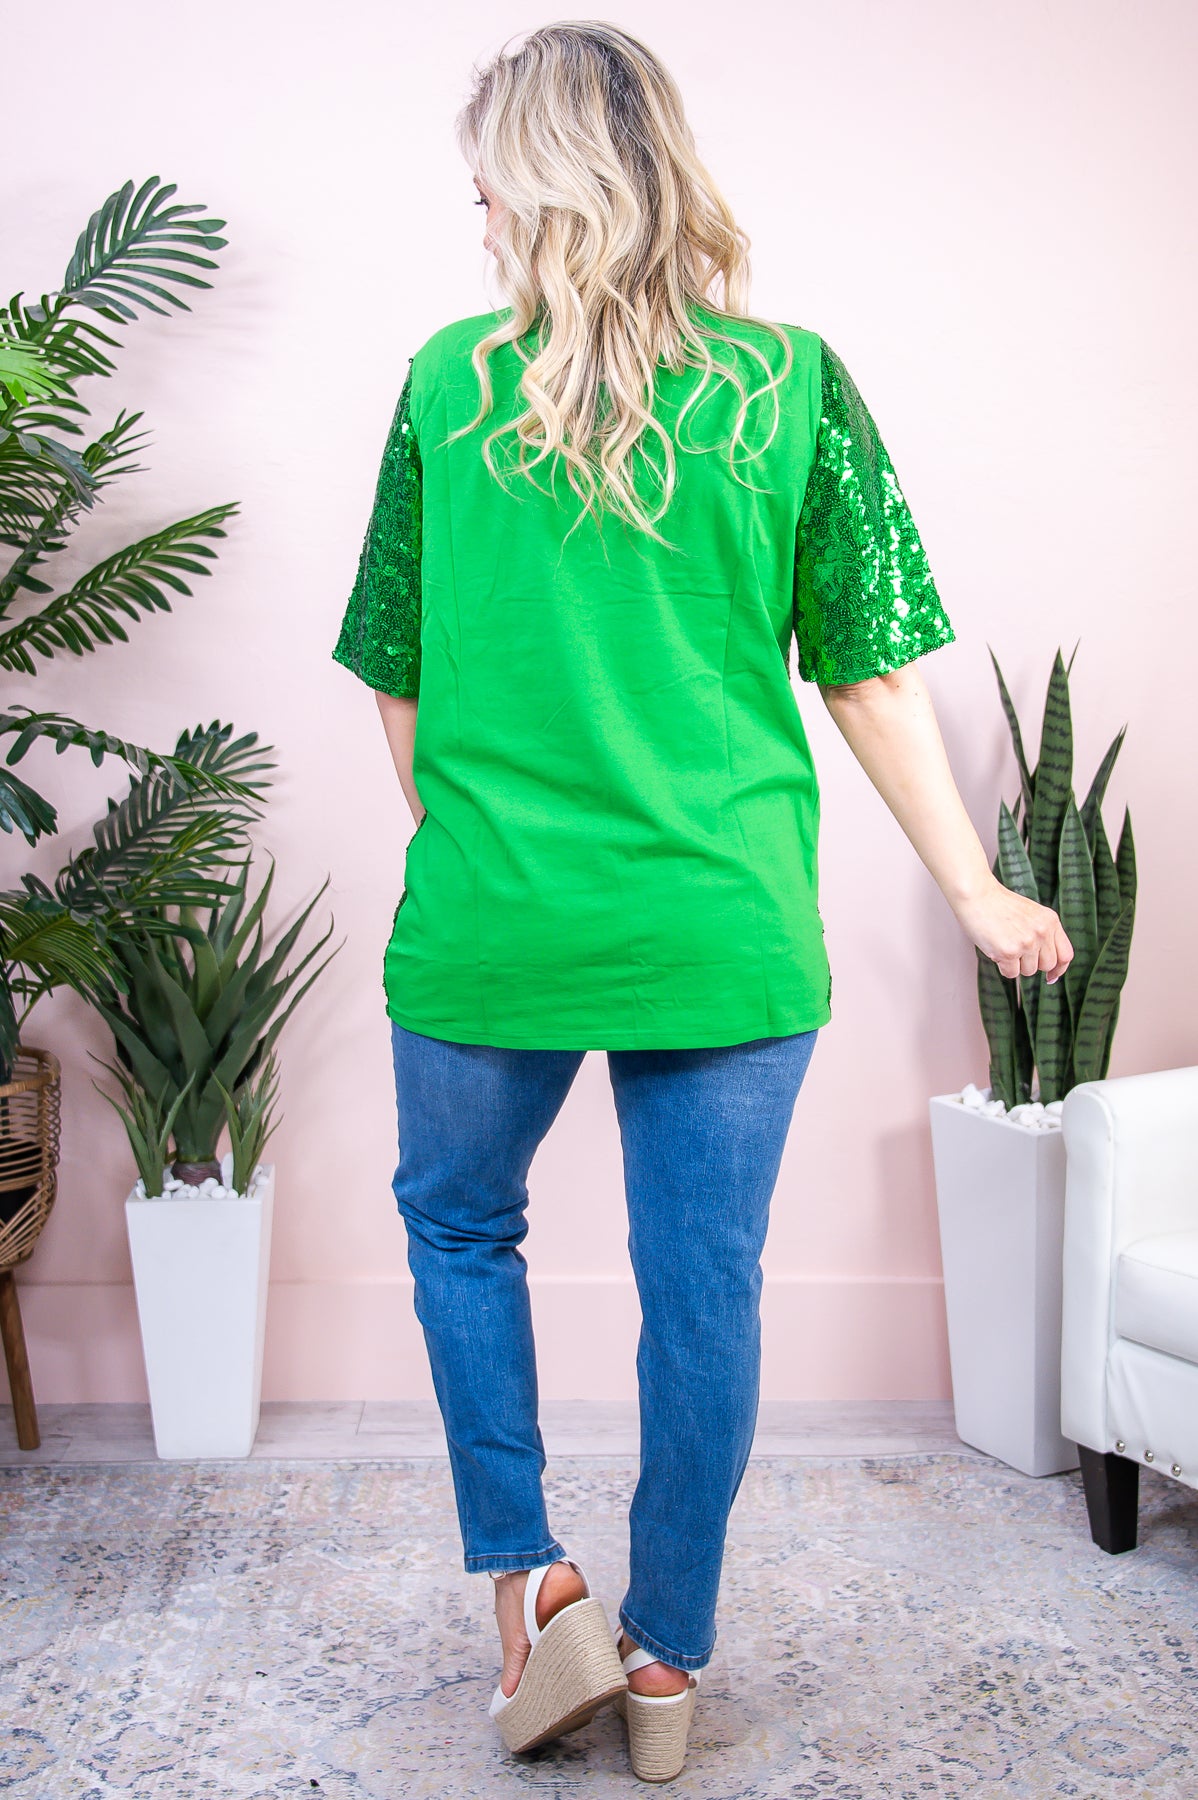 Who Needs Luck Green/White Sequins Tunic (One Size 4-14) - T8941GN